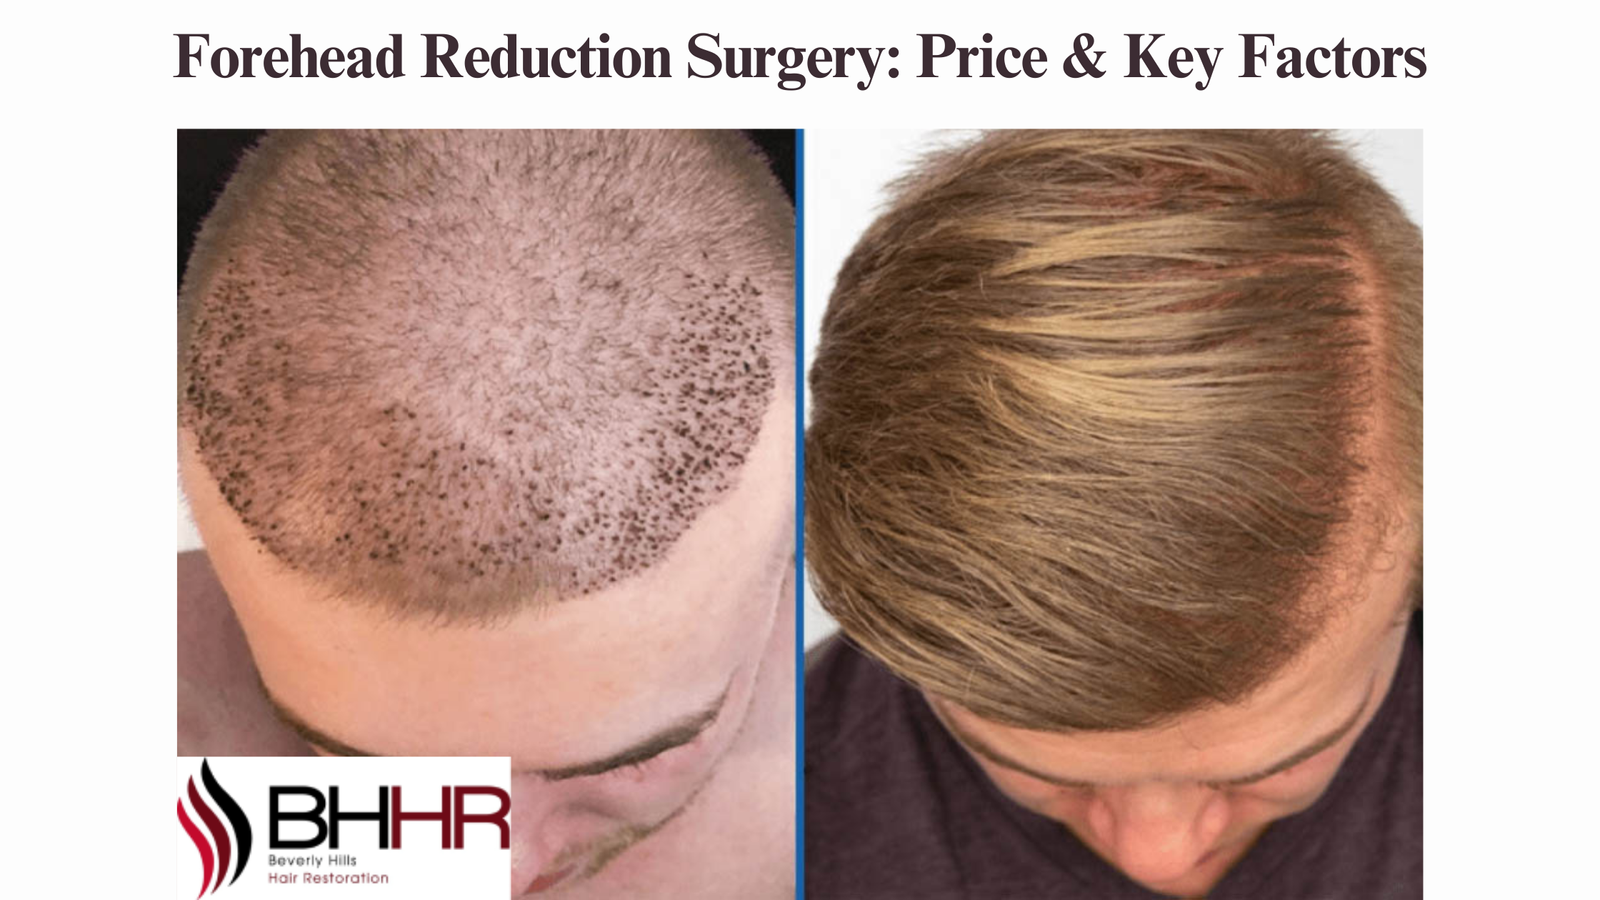 Forehead Reduction Surgery: Price & Key Factors